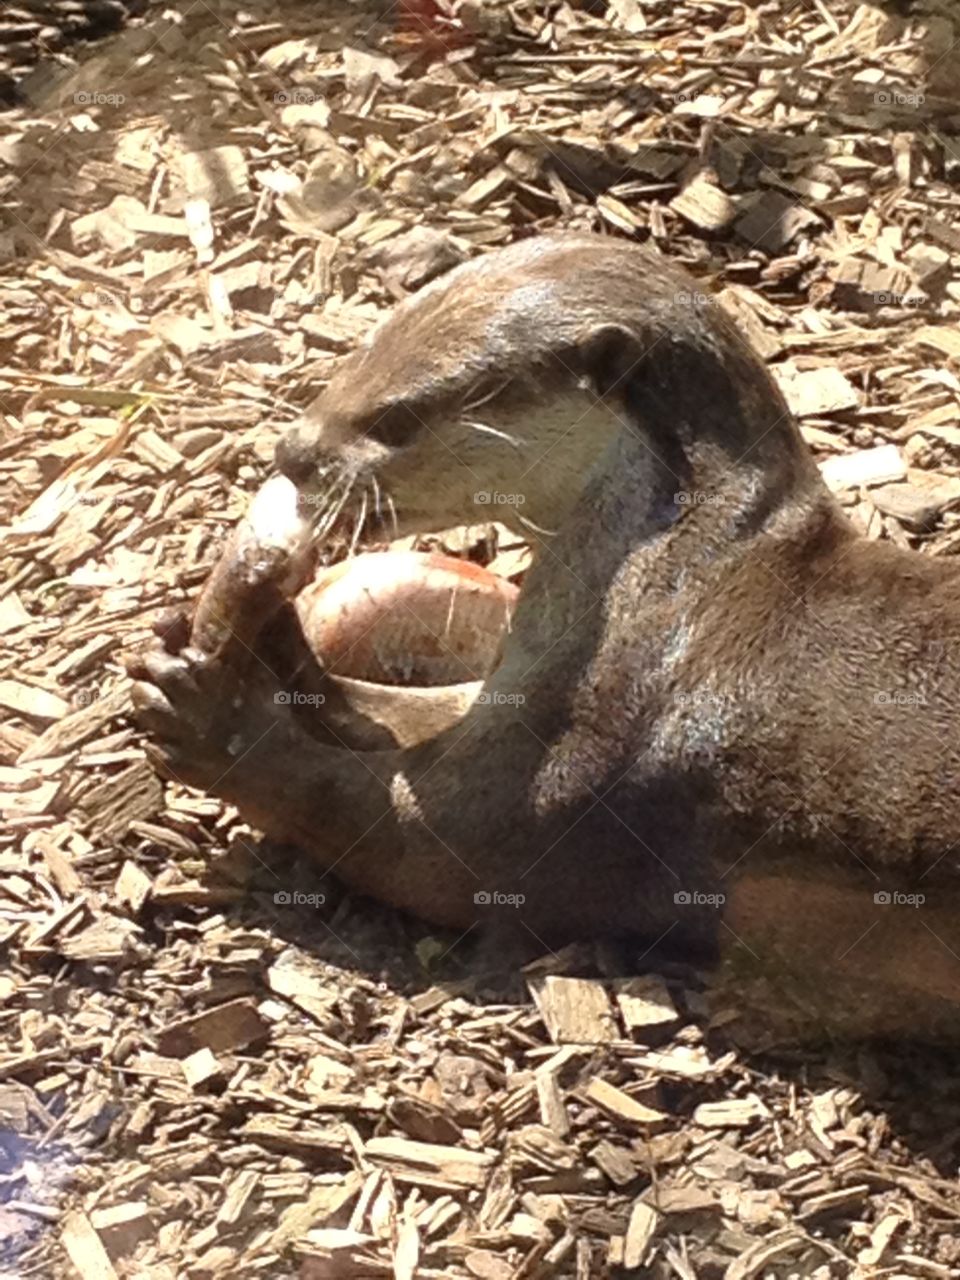 Otter eating its lunch